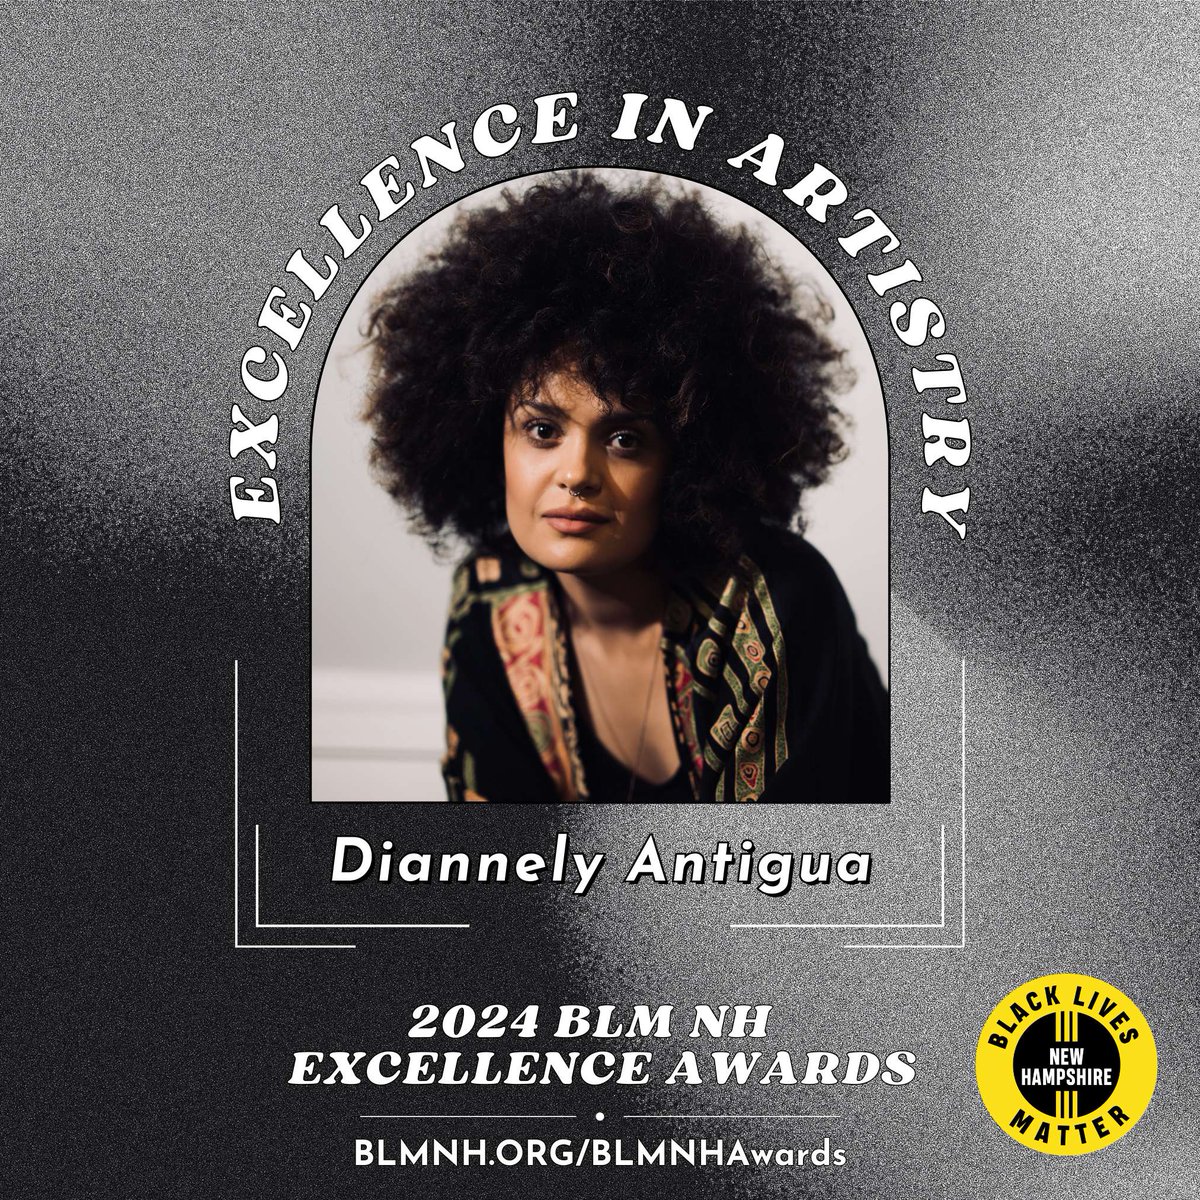 📣 We’re excited to announce our first winner for the 2024 BLM NH Awards, Diannely Antigua, for the Excellence in Artistry award 🖤 Join us in celebrating her impactful contributions to literature & social change! 🌟 🔗 Tickets: BLMNH.ORG/BLMNHAwards #BLMNHAwards @nellfell13